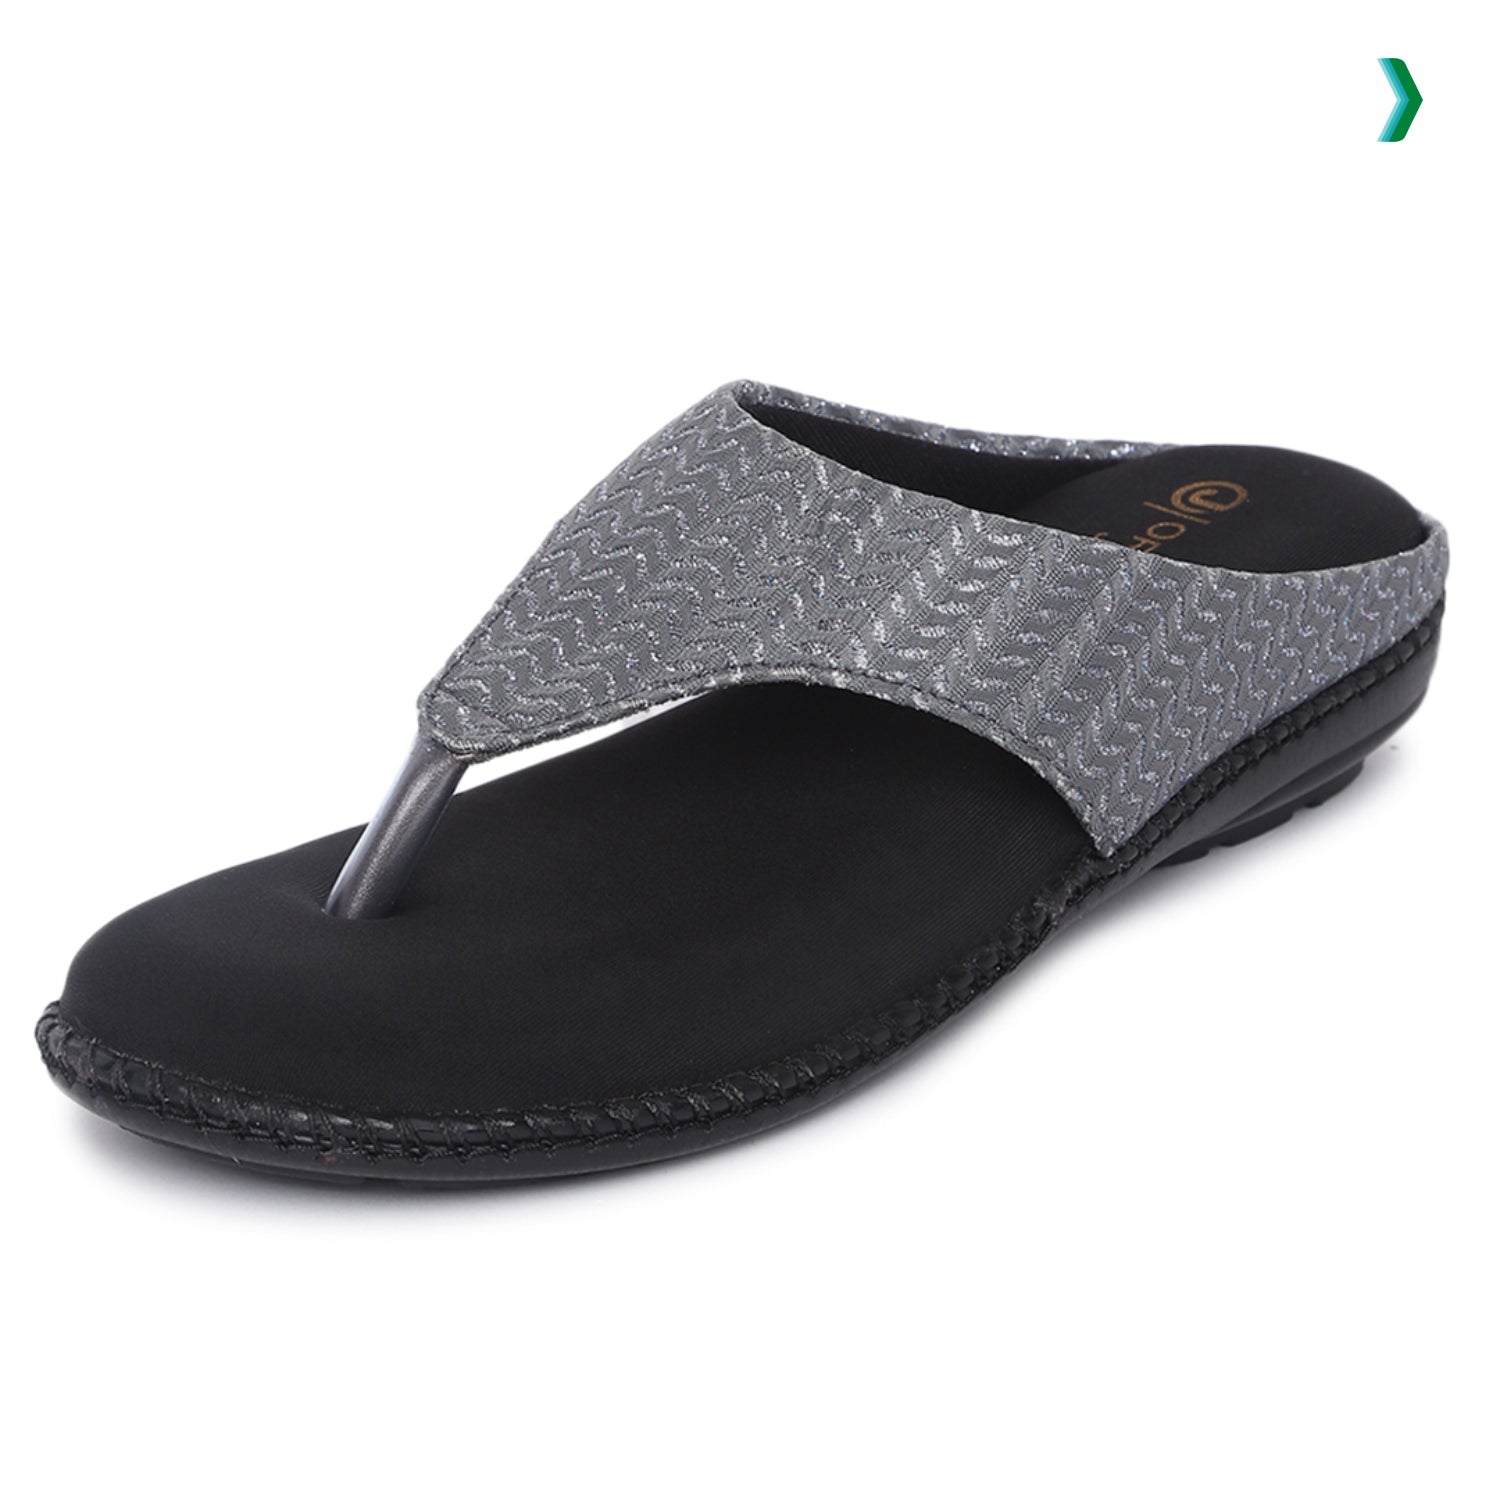 doctor extra soft slippers for ladies, extra soft chappals for ladies